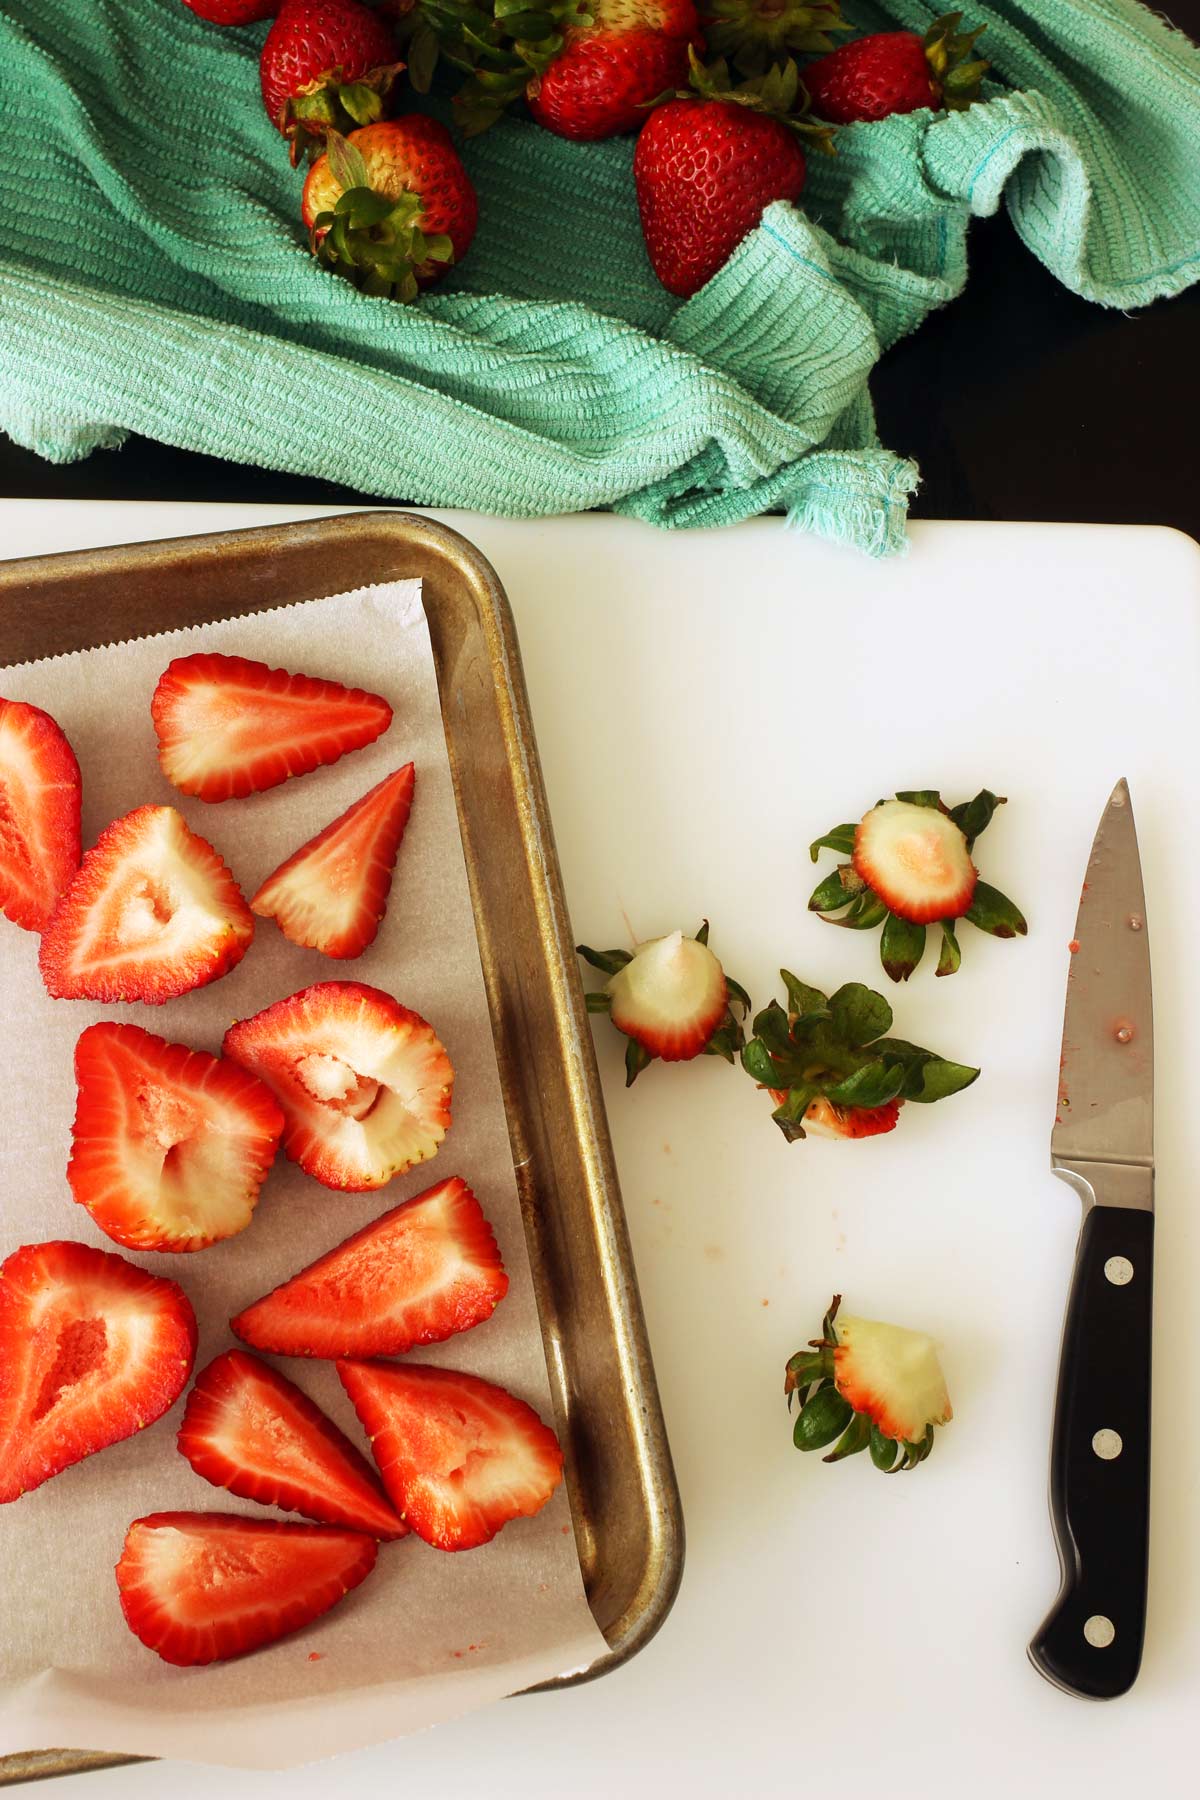 strawberry cores and knife on cutting board next to tray of strawberries prepped for freezing.